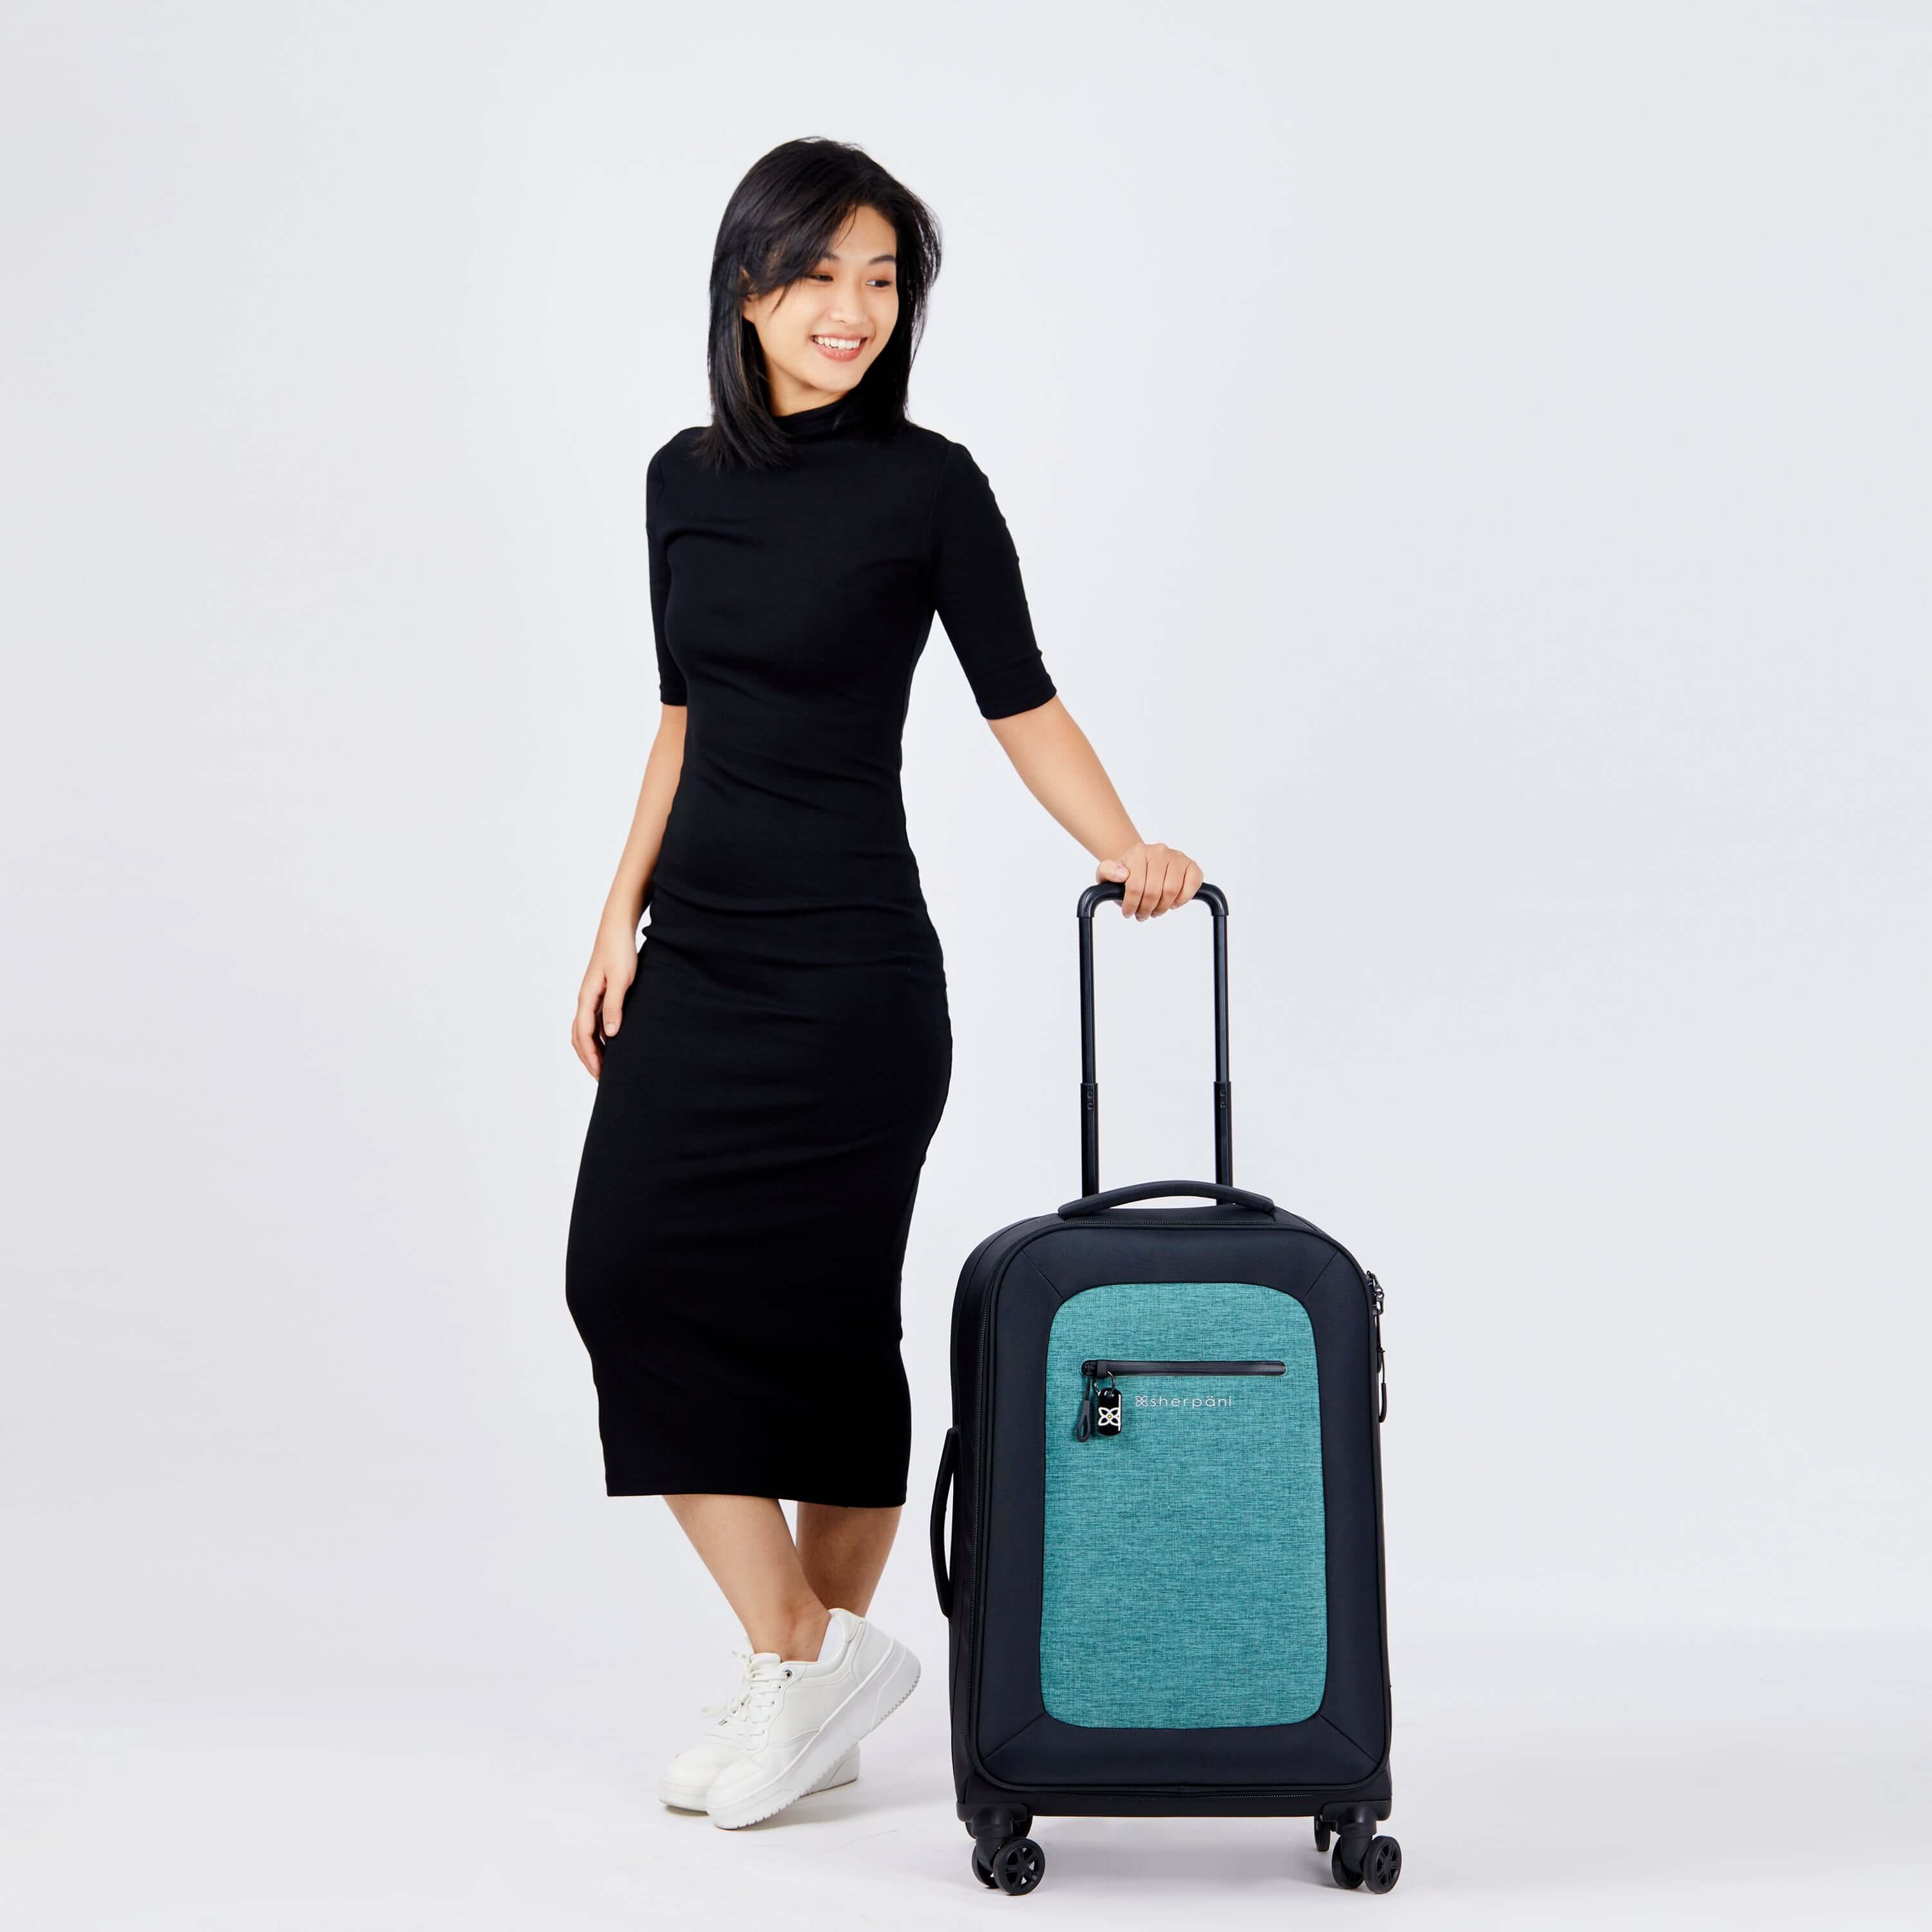 Full body view of a dark haired model smiling over her left shoulder. She wears a black dress and white sneakers. She is holding the retractable handle of Sherpani's Anti-Theft luggage, the Hemisphere in Teal, which stands next to her. #color_teal